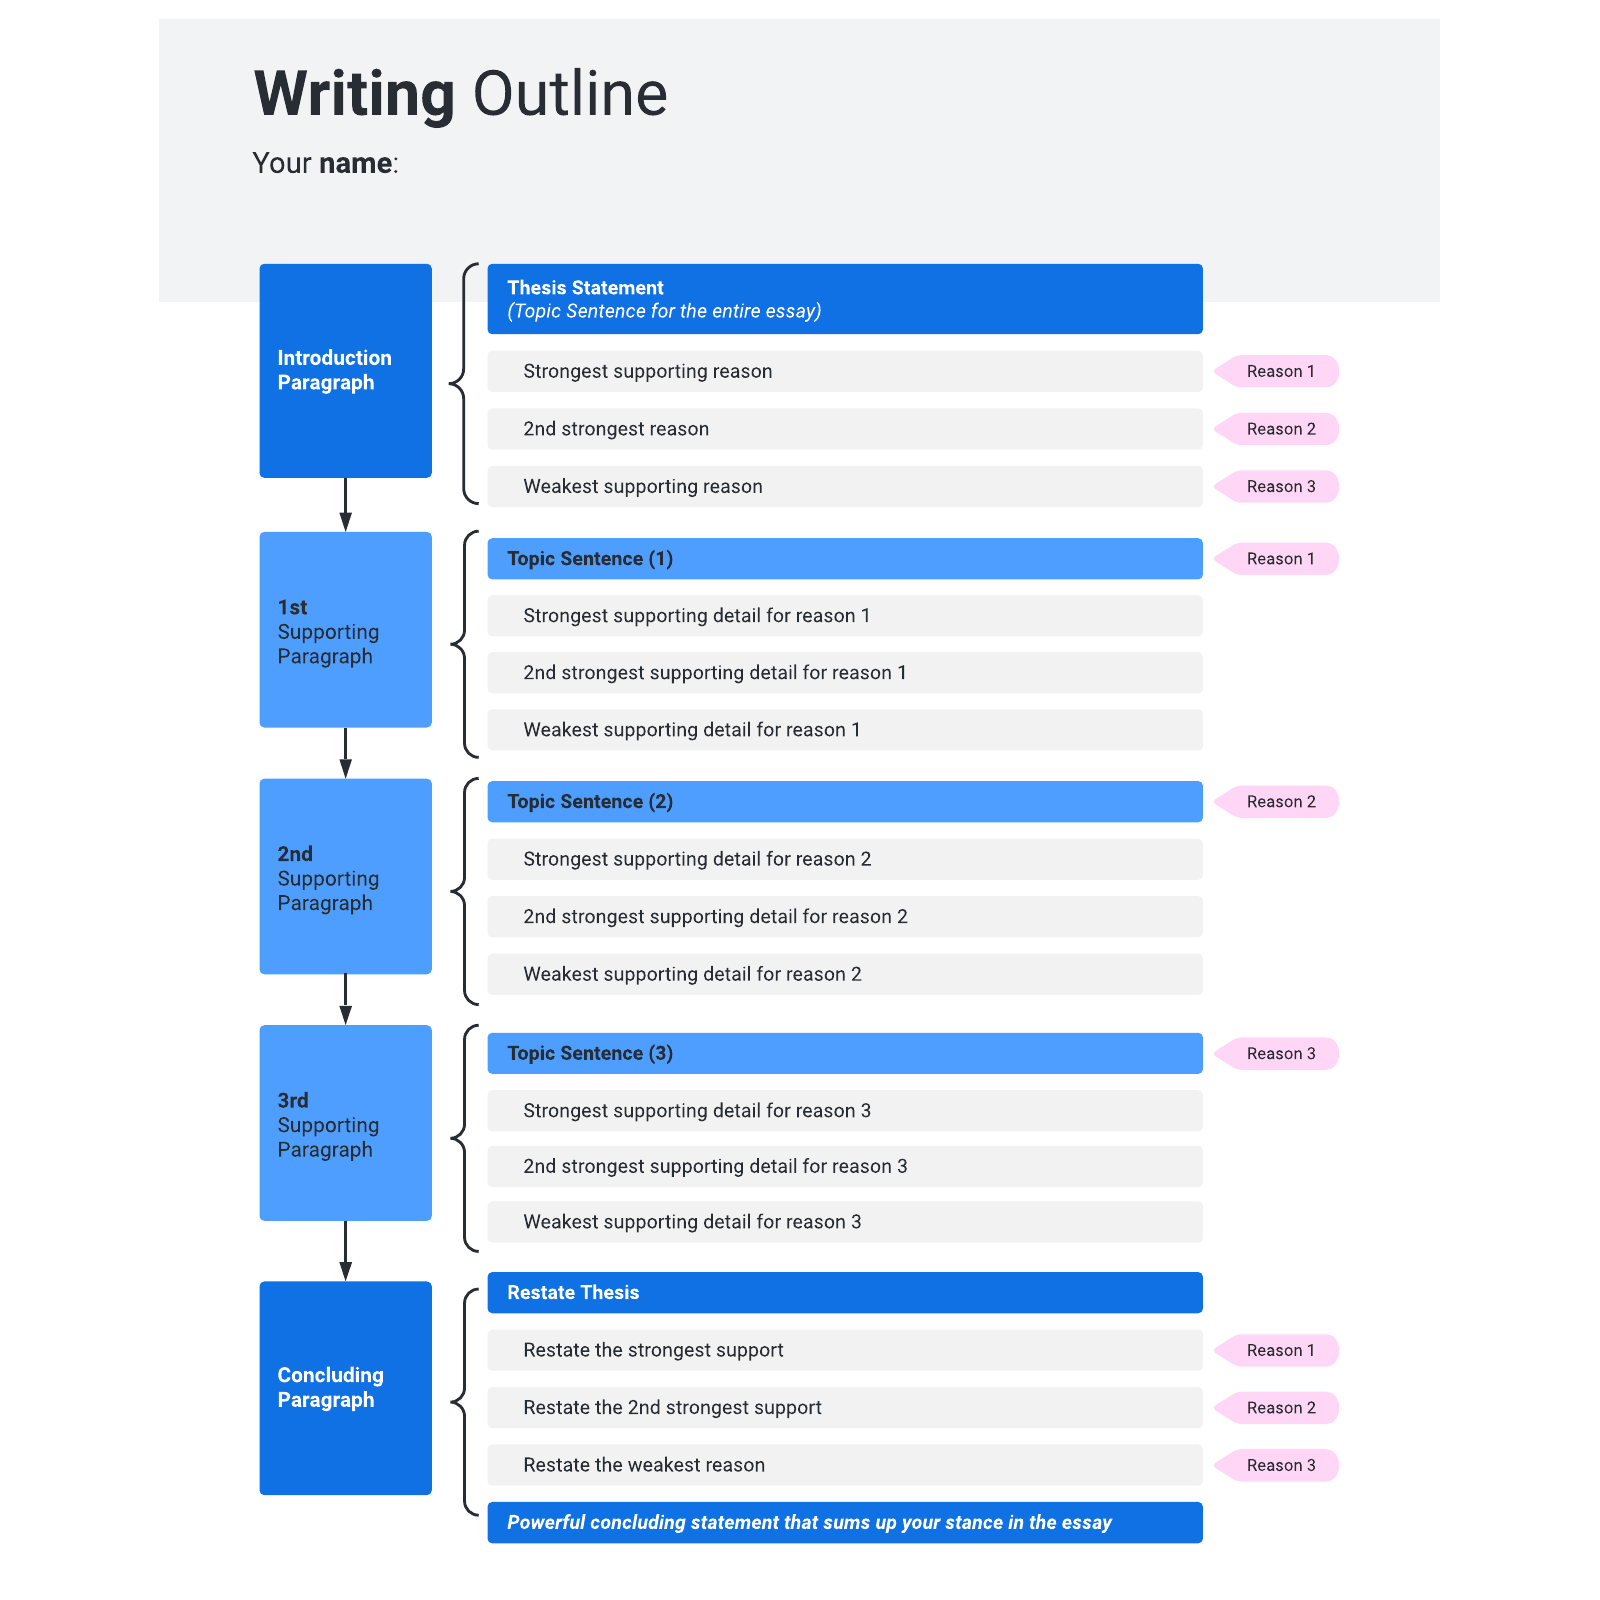 Writing outline example